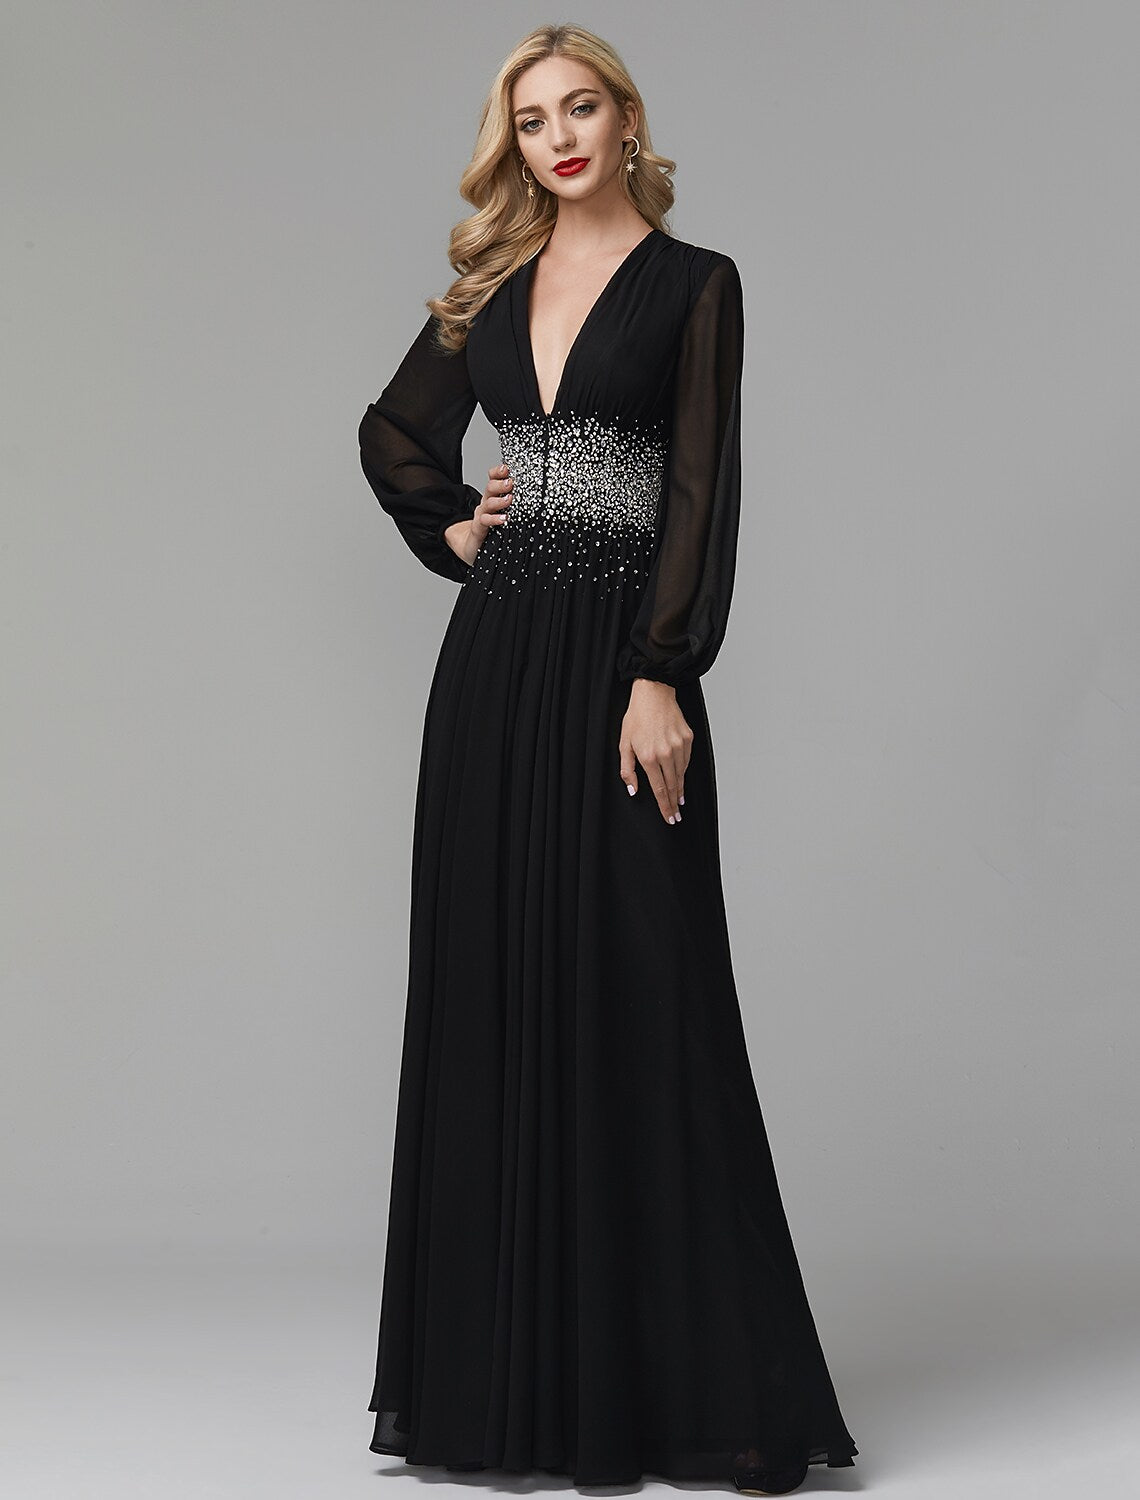 A-Line Evening Dress Celebrity Red Carpet Formal Gown Black Tie Wedding Guest Floor Length Long Sleeve V Neck Chiffon with Sequin